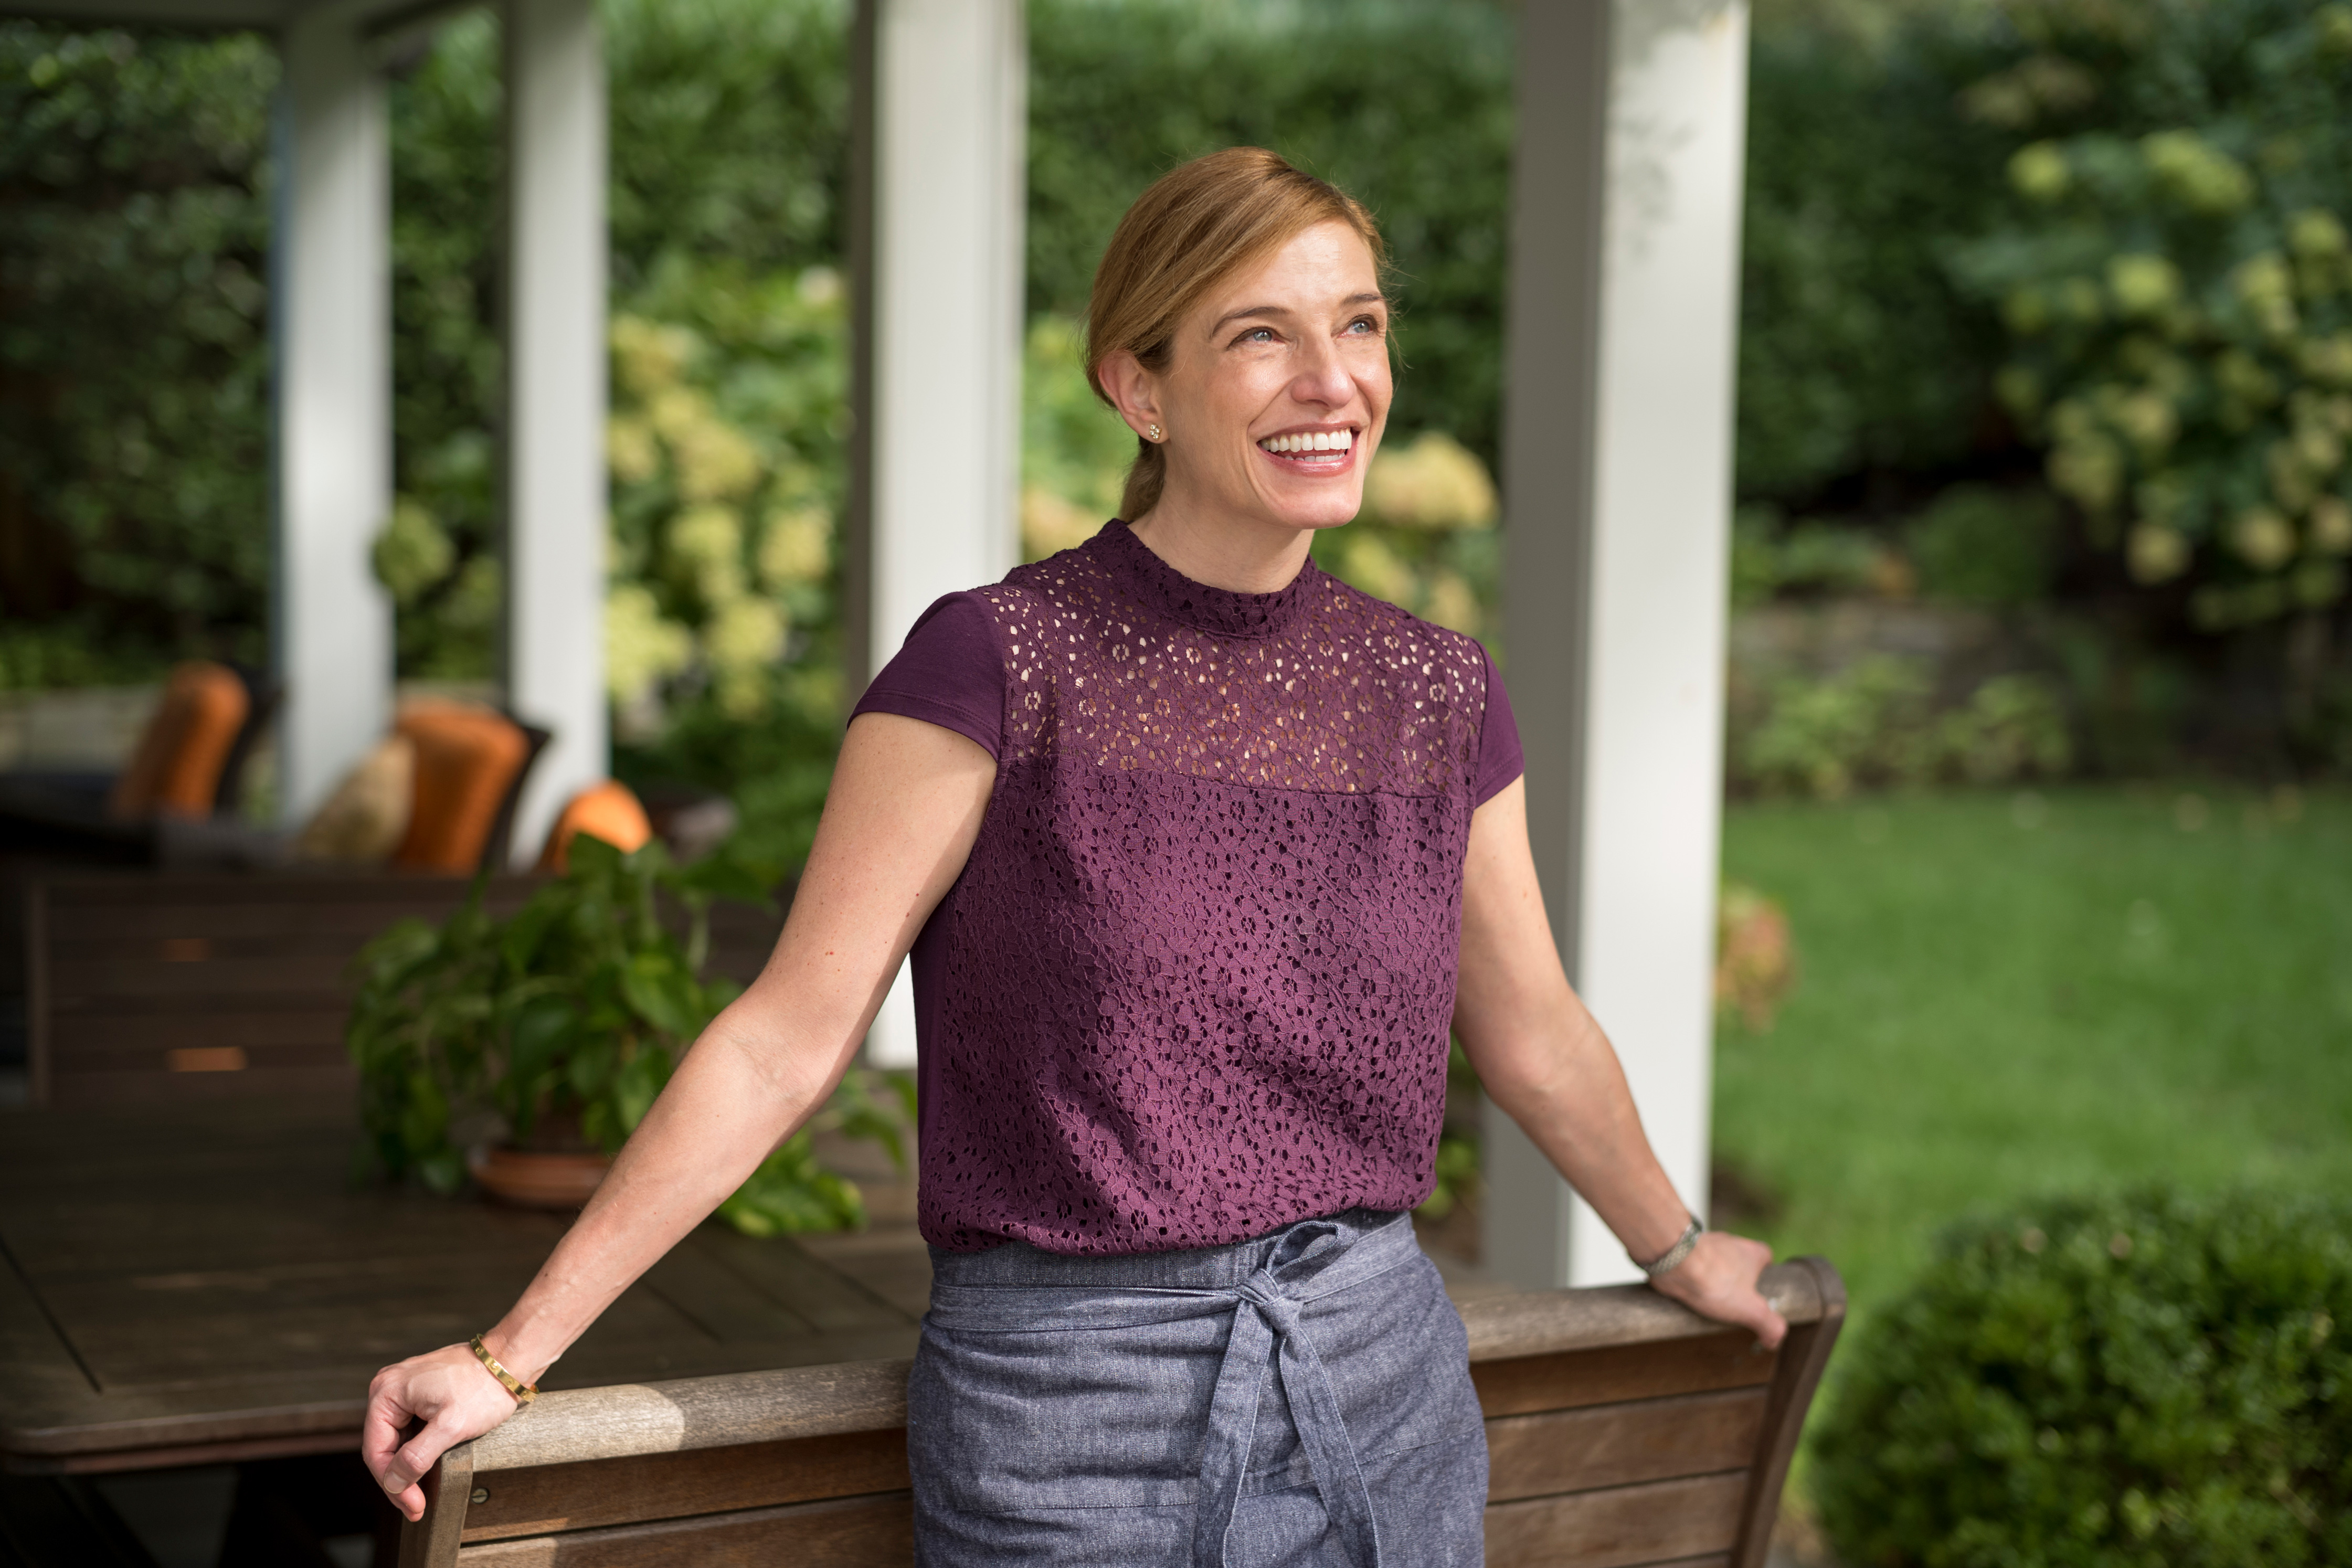 Pati Jinich, host of "Pati's Mexican Table," photo courtesy David Butow